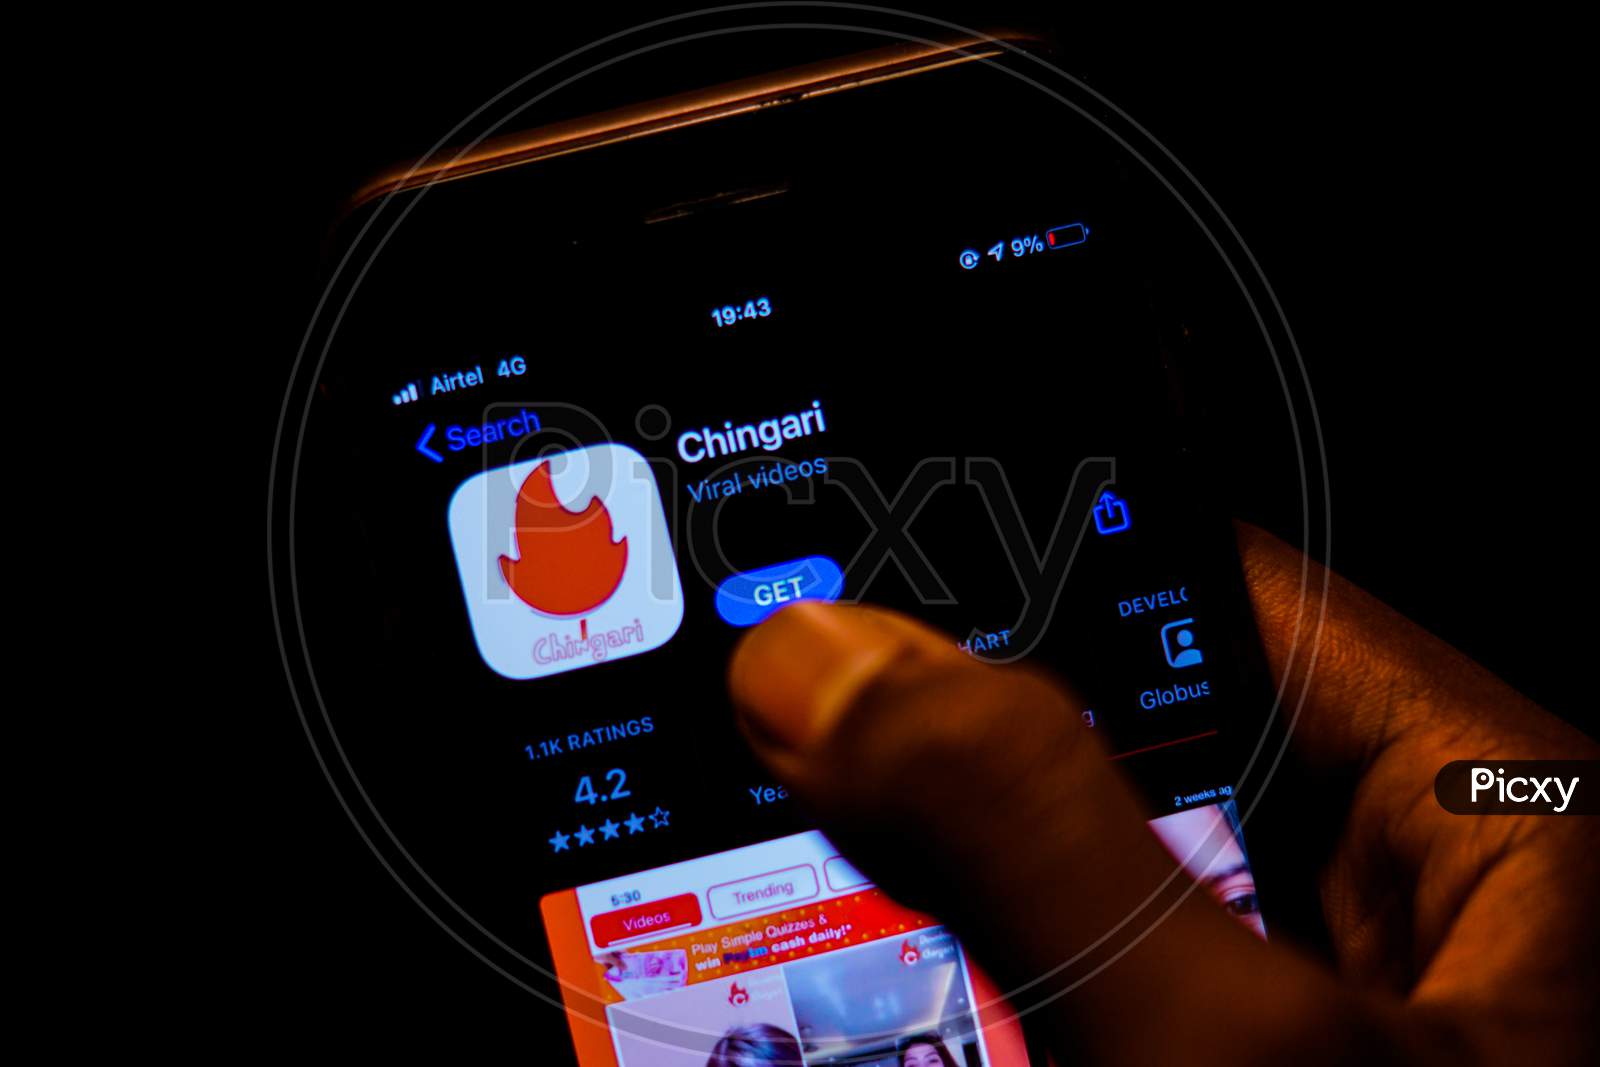 Chingari App on Mobile screen with a finger about to Download the App from the Appstore